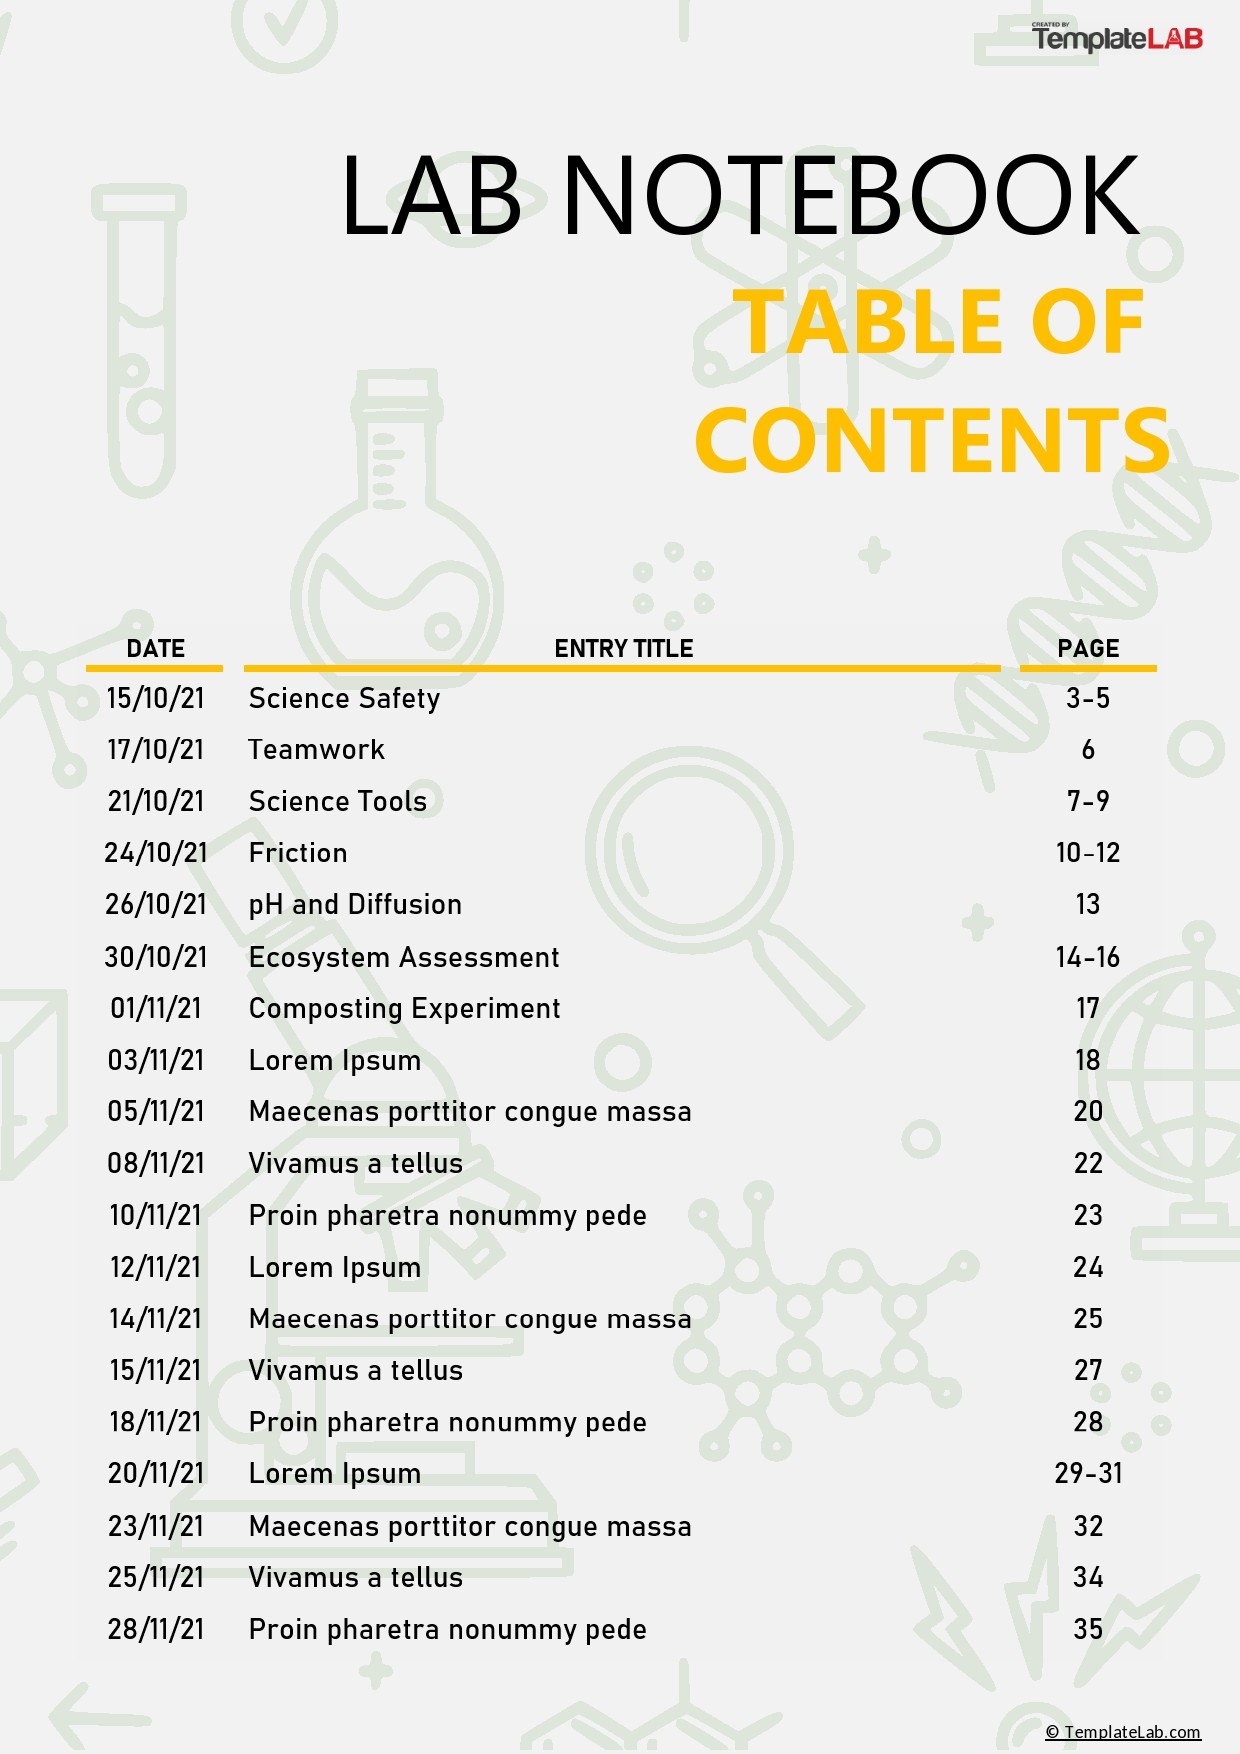 22 Table of Contents Templates and Examples ᐅ TemplateLab